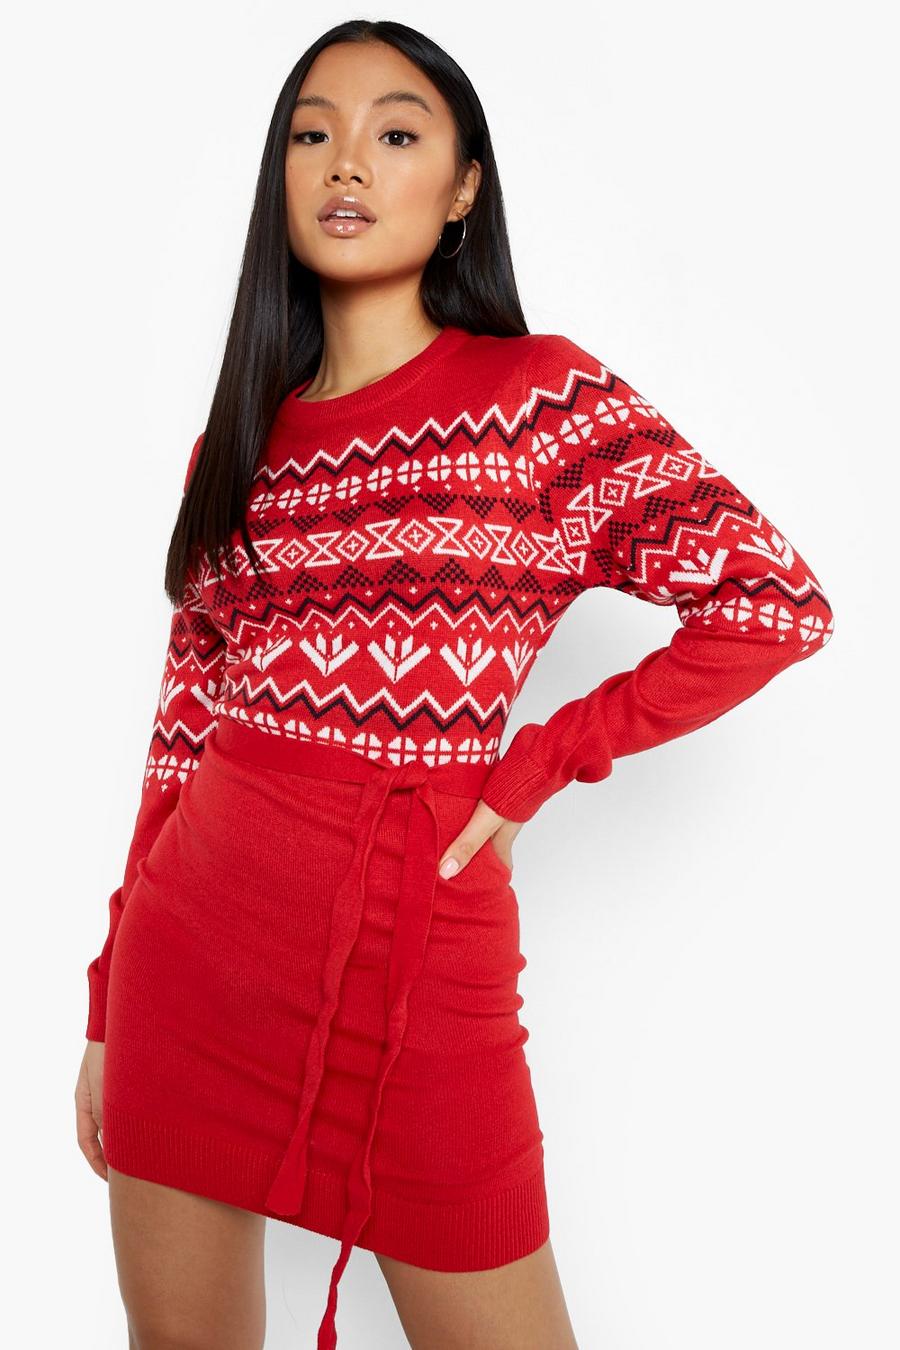 Red rouge Petite Belted Knitted Christmas Jumper Dress